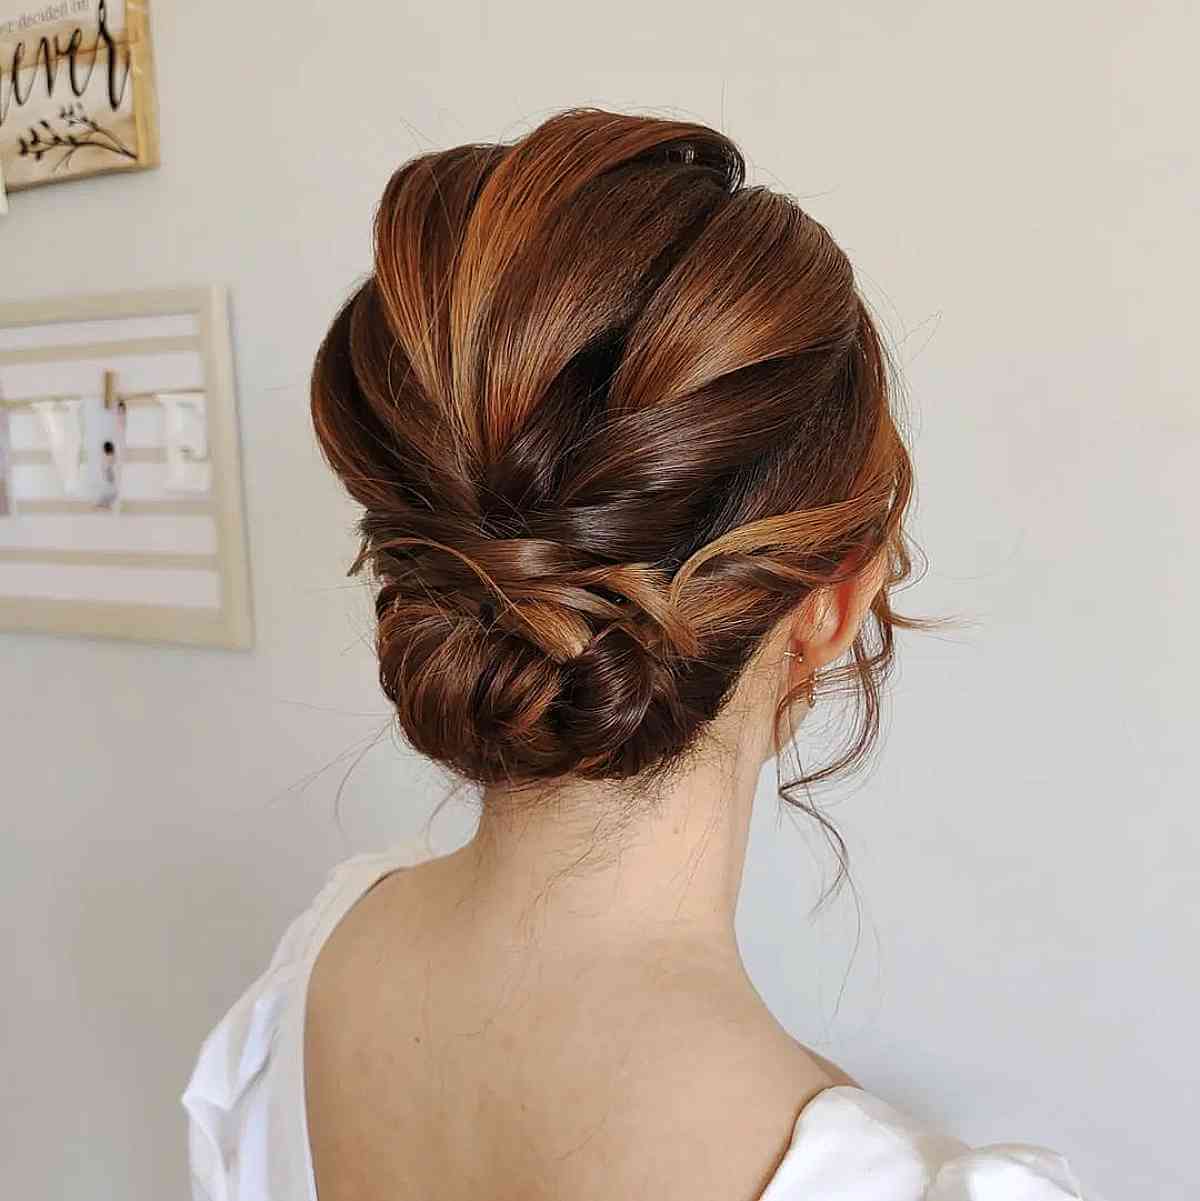 Simply Elegant and Classic Short Hairstyle for a Wedding